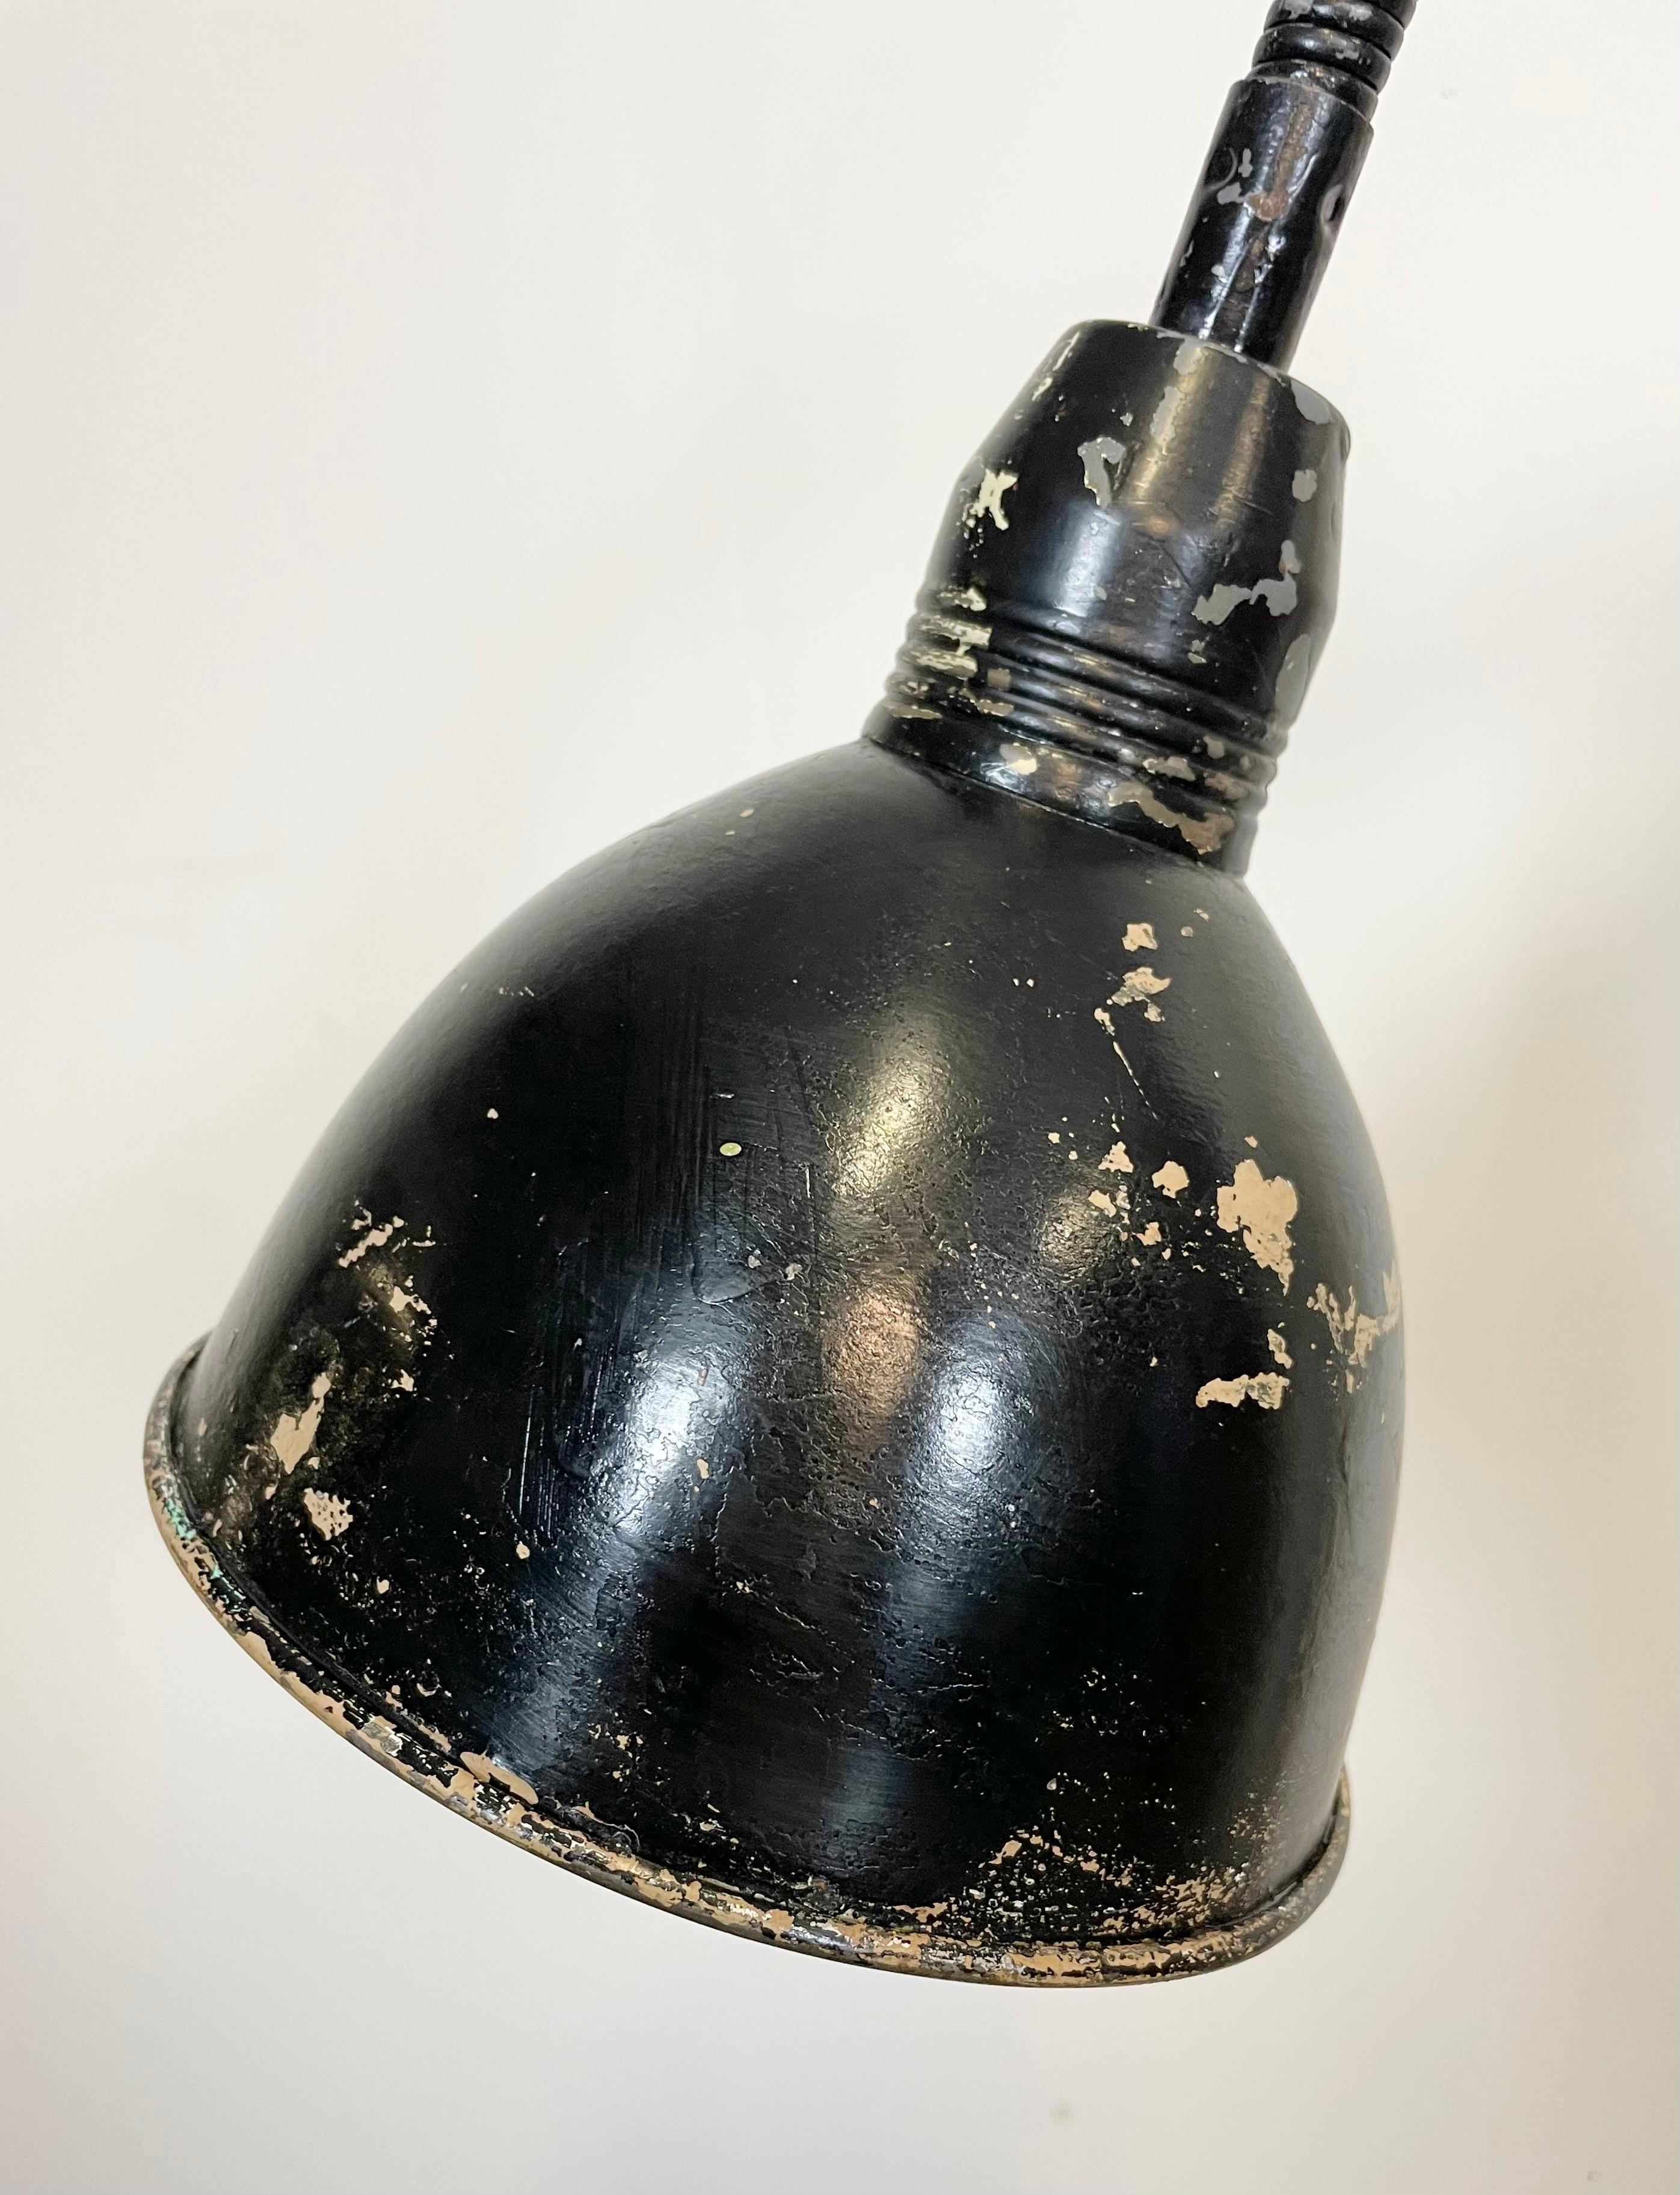 This black vintage Industrial scissor wall lamp was produced by Elektroinstala in former Czechoslovakia during the 1960s. It has a metal lampshade. The iron scissor arm is extendable and can be turned sideways. The socket requires E 27 lightbulbs .